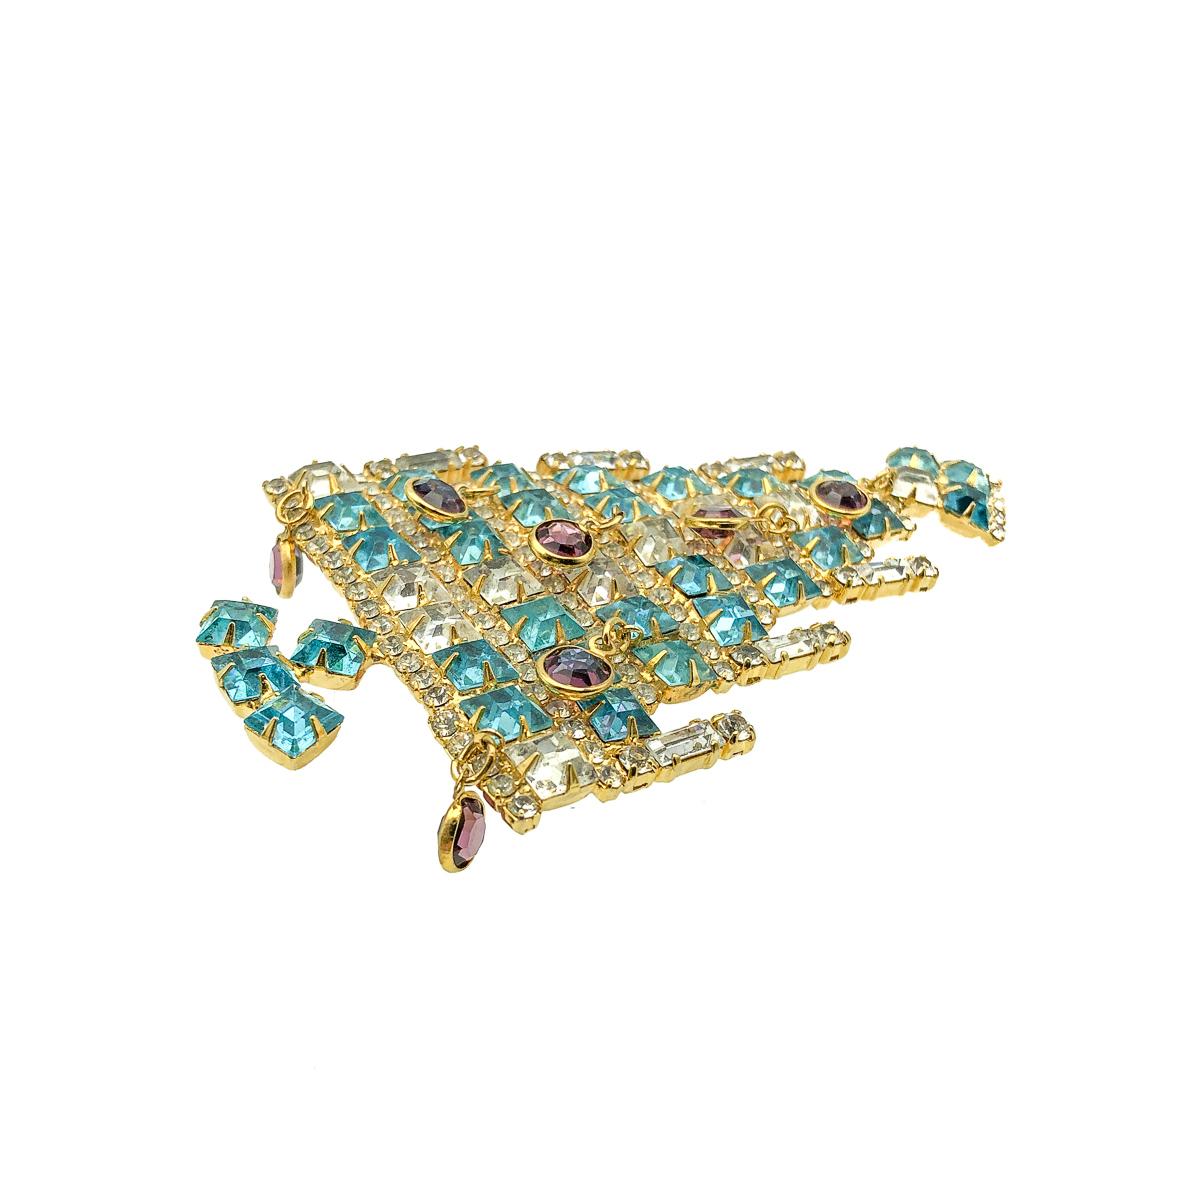 A spectacular and large Vintage Dominique Christmas Tree Brooch with dangling baubles and candles. Crafted in gold plated metal and featuring gorgeous square cut crystal stones in turquoise and white with six crystal baguette stone candles and